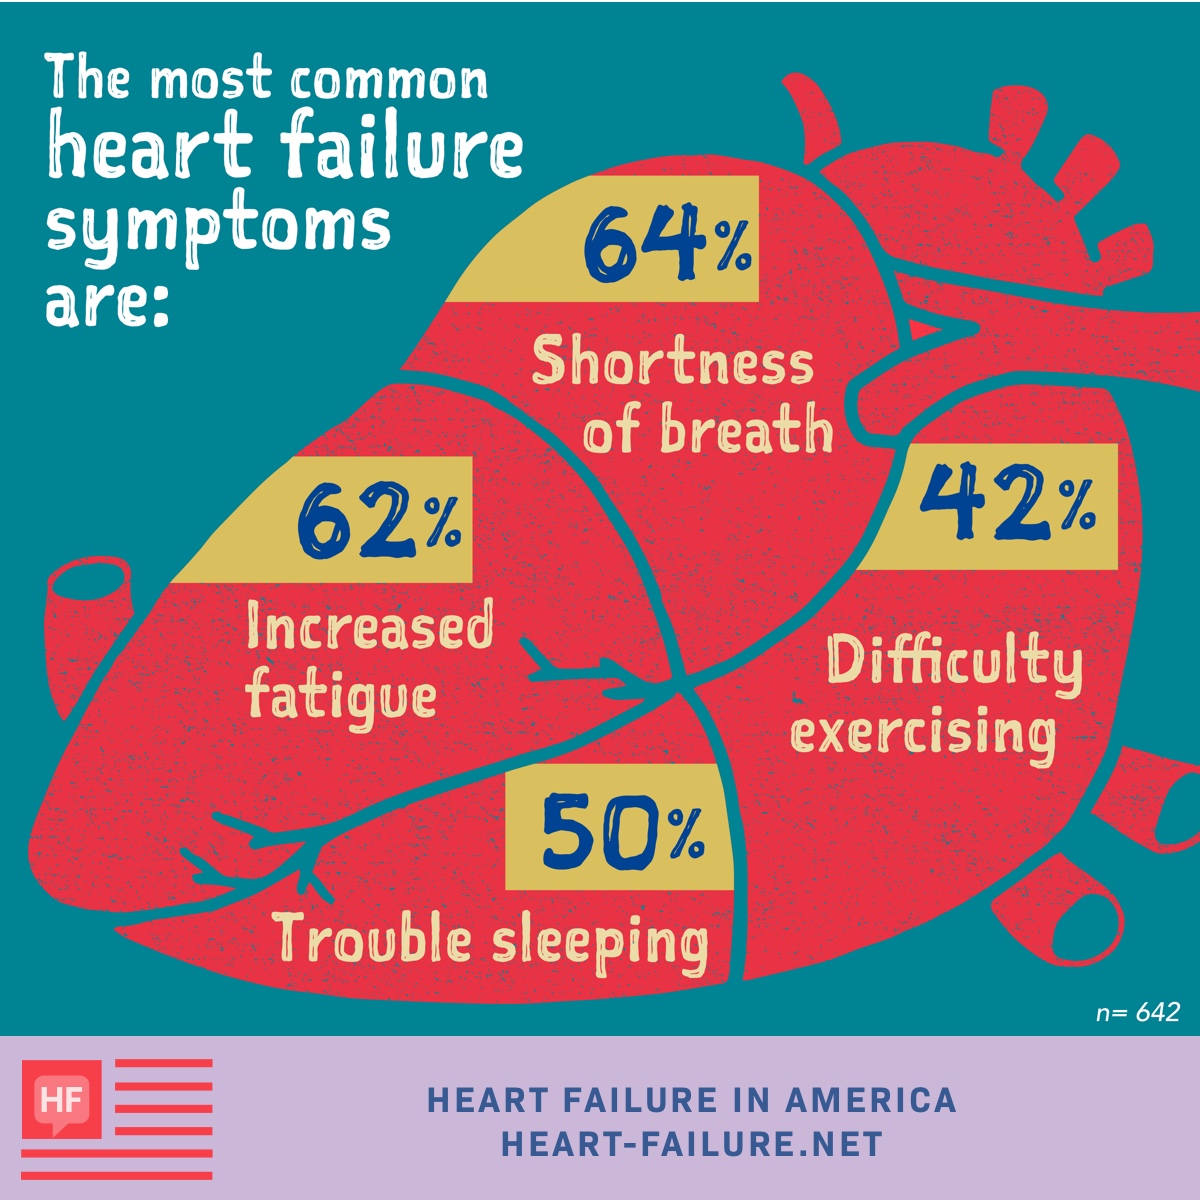 The most commonly reported heart failure symptoms are shortness of breath (64%), increased fatigue (62%), trouble sleeping (50%), and difficulty exercising (42%).